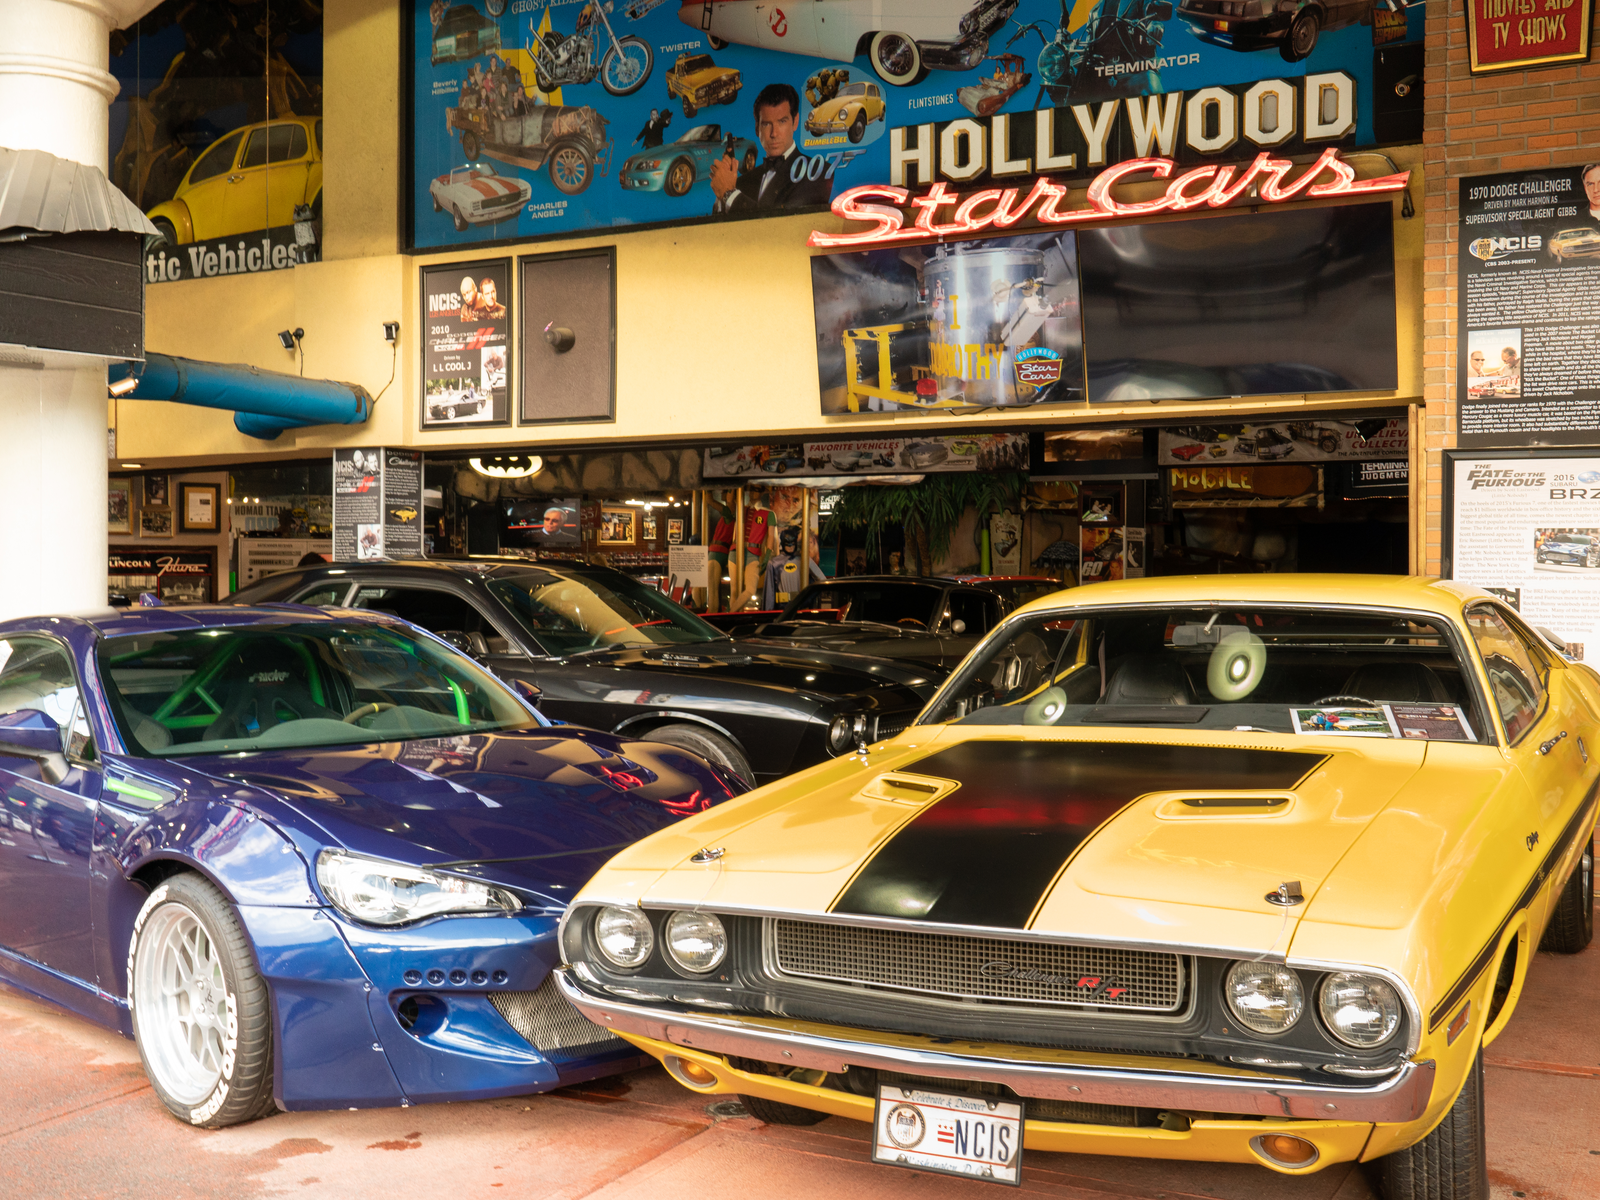 a vintage two-door yellow sedan, modern two-door sedan, and several other cars being exhibited at one of the best things to do in gatlinburg, tennessee, hollywood star cars museum